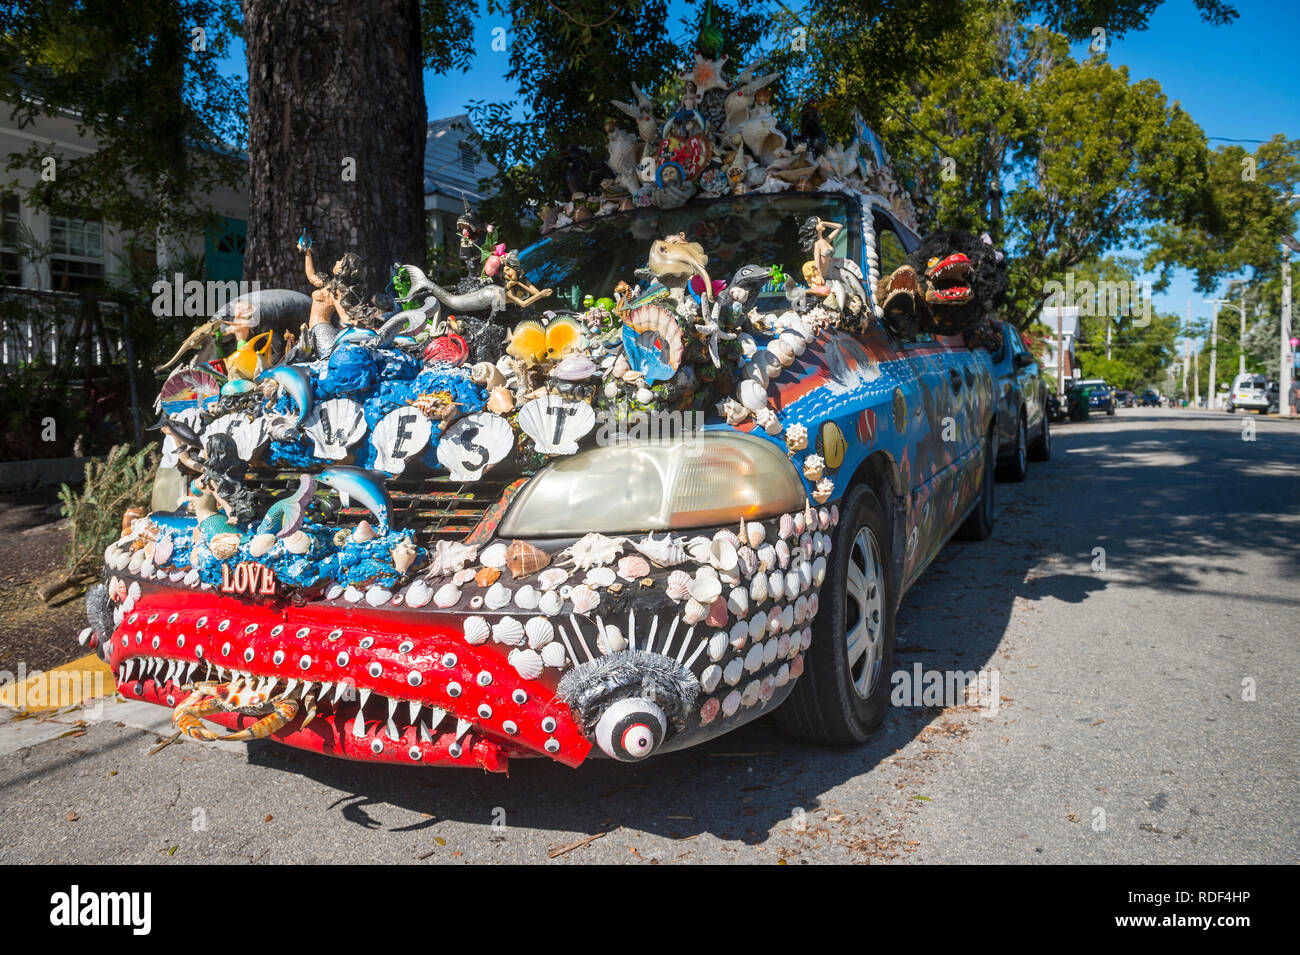 KEY WEST, FLORIDA, USA - JANUARY 14, 2019: A car decorated with a unique mix of shells and figurines stands parked on a quiet residential street. Stock Photo